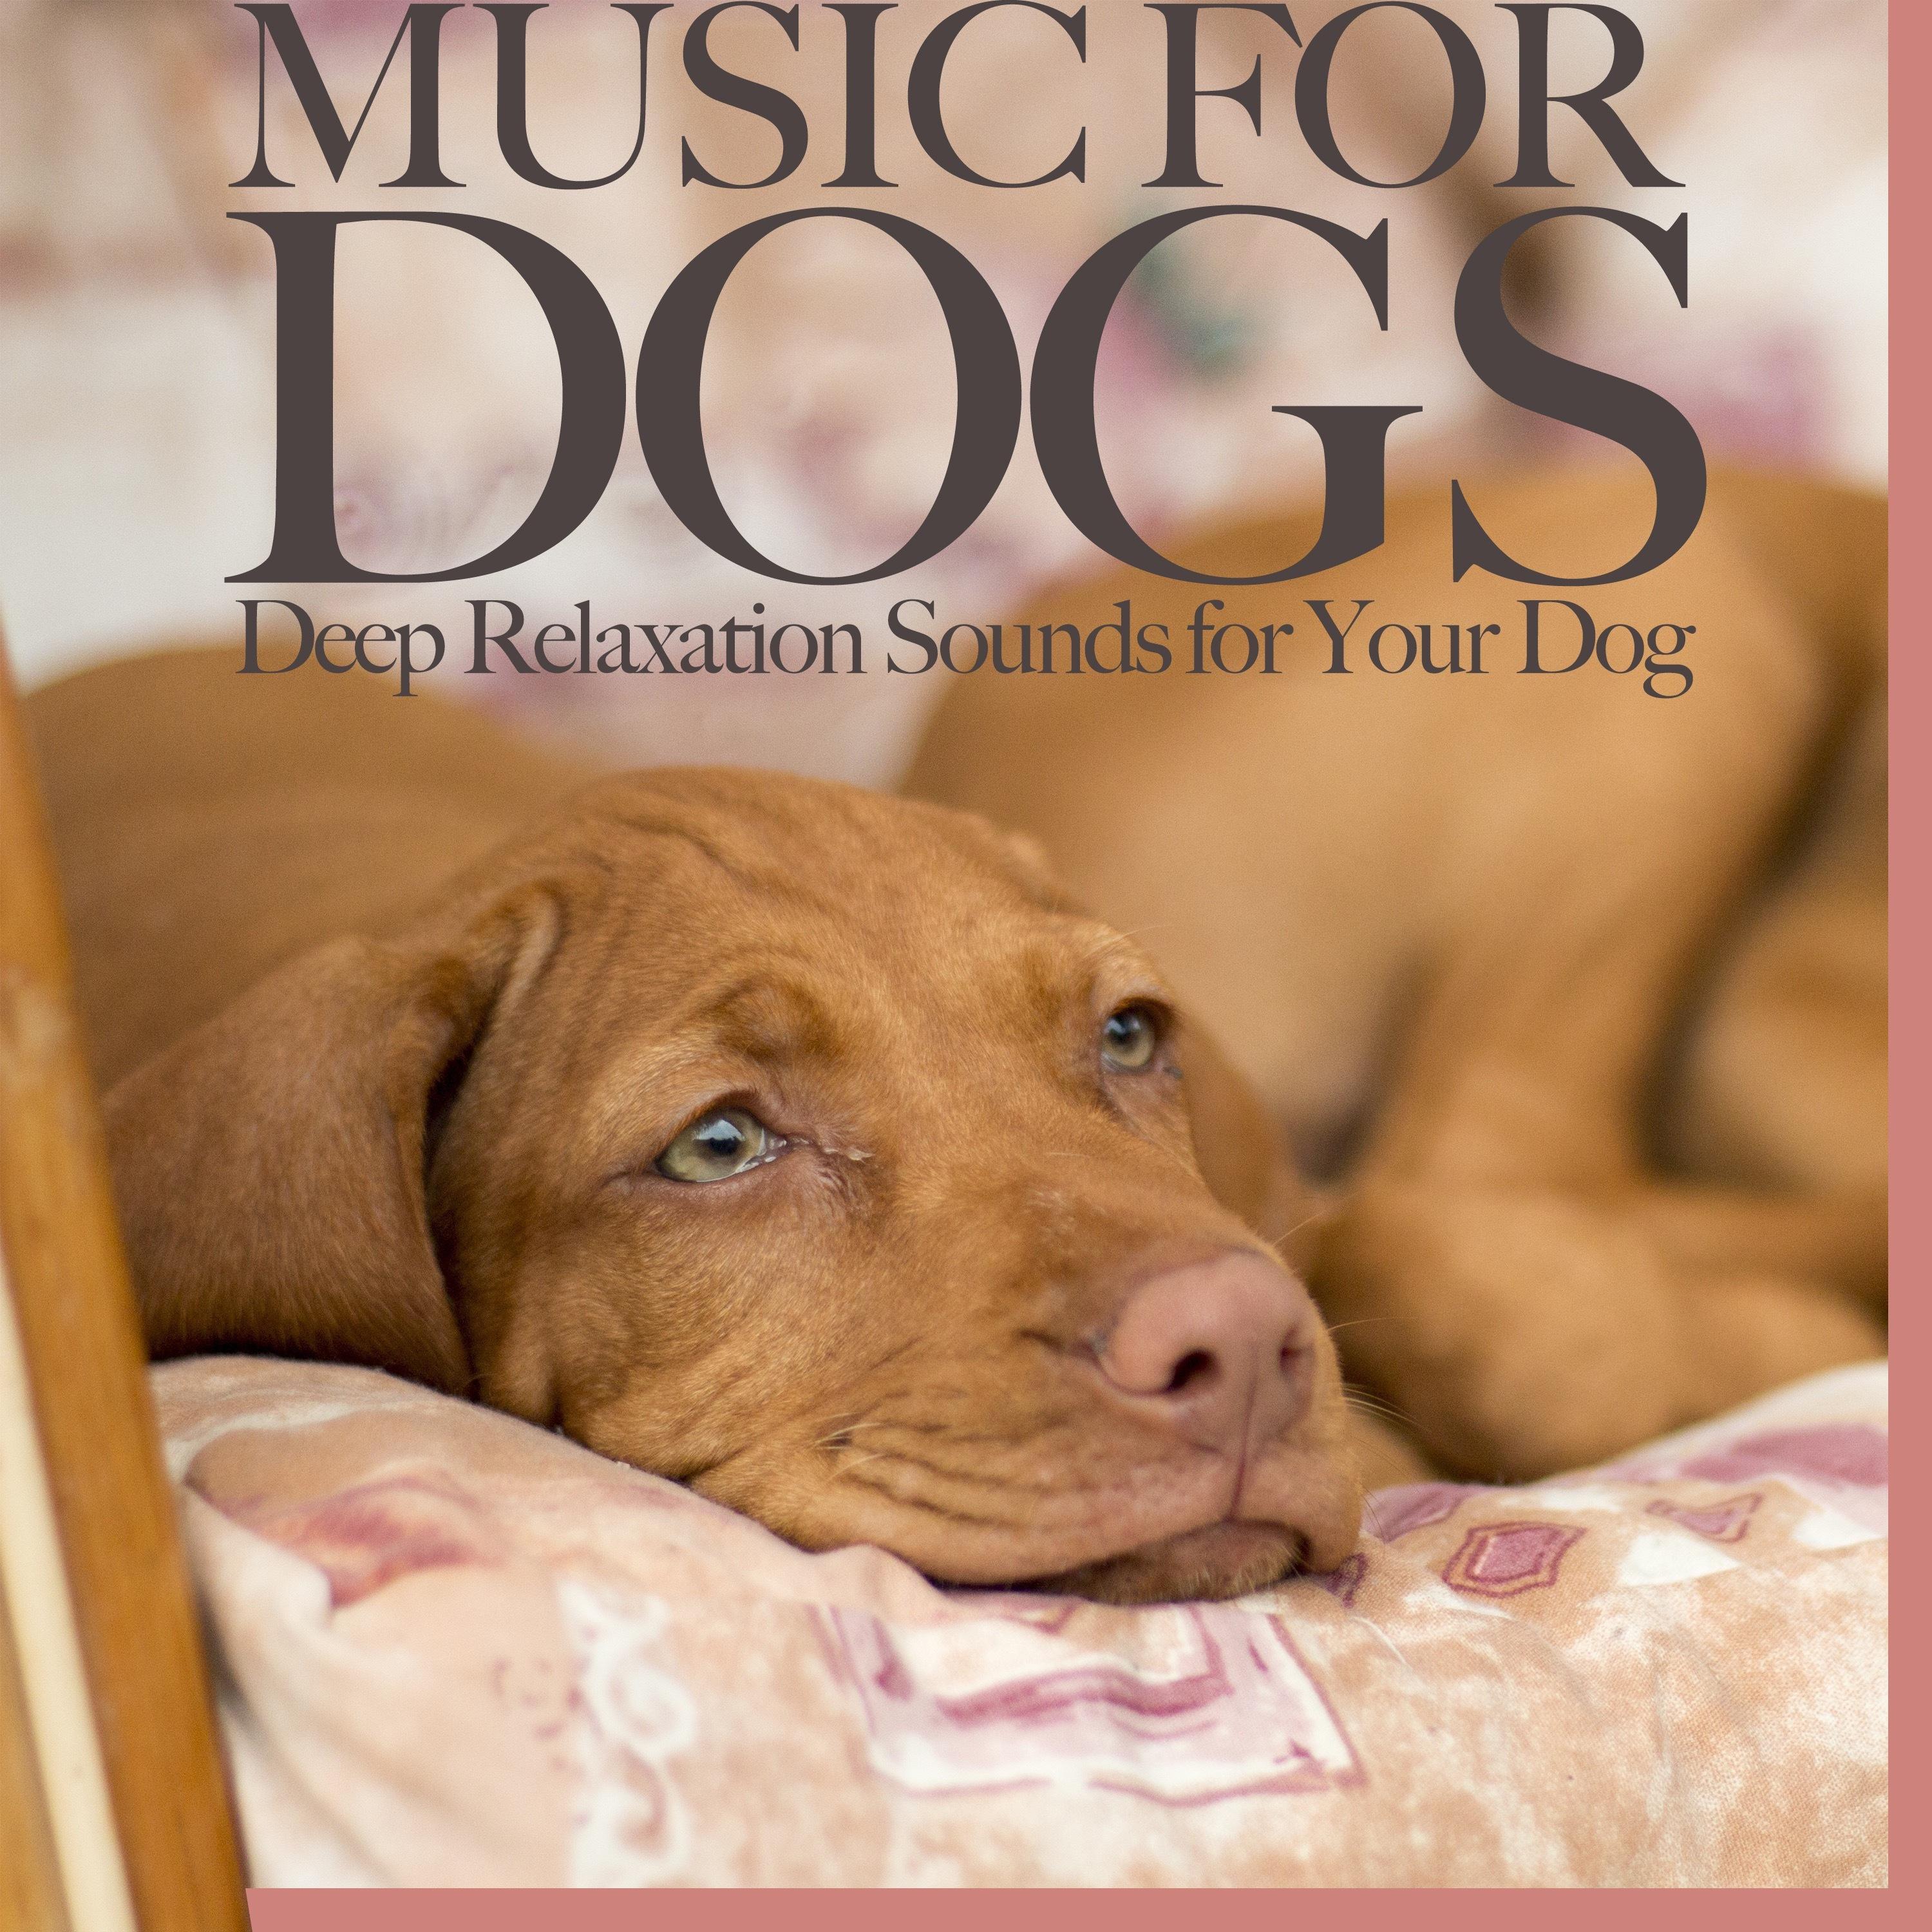 Music For Dogs: Deep Relaxation Sounds for Your Dog